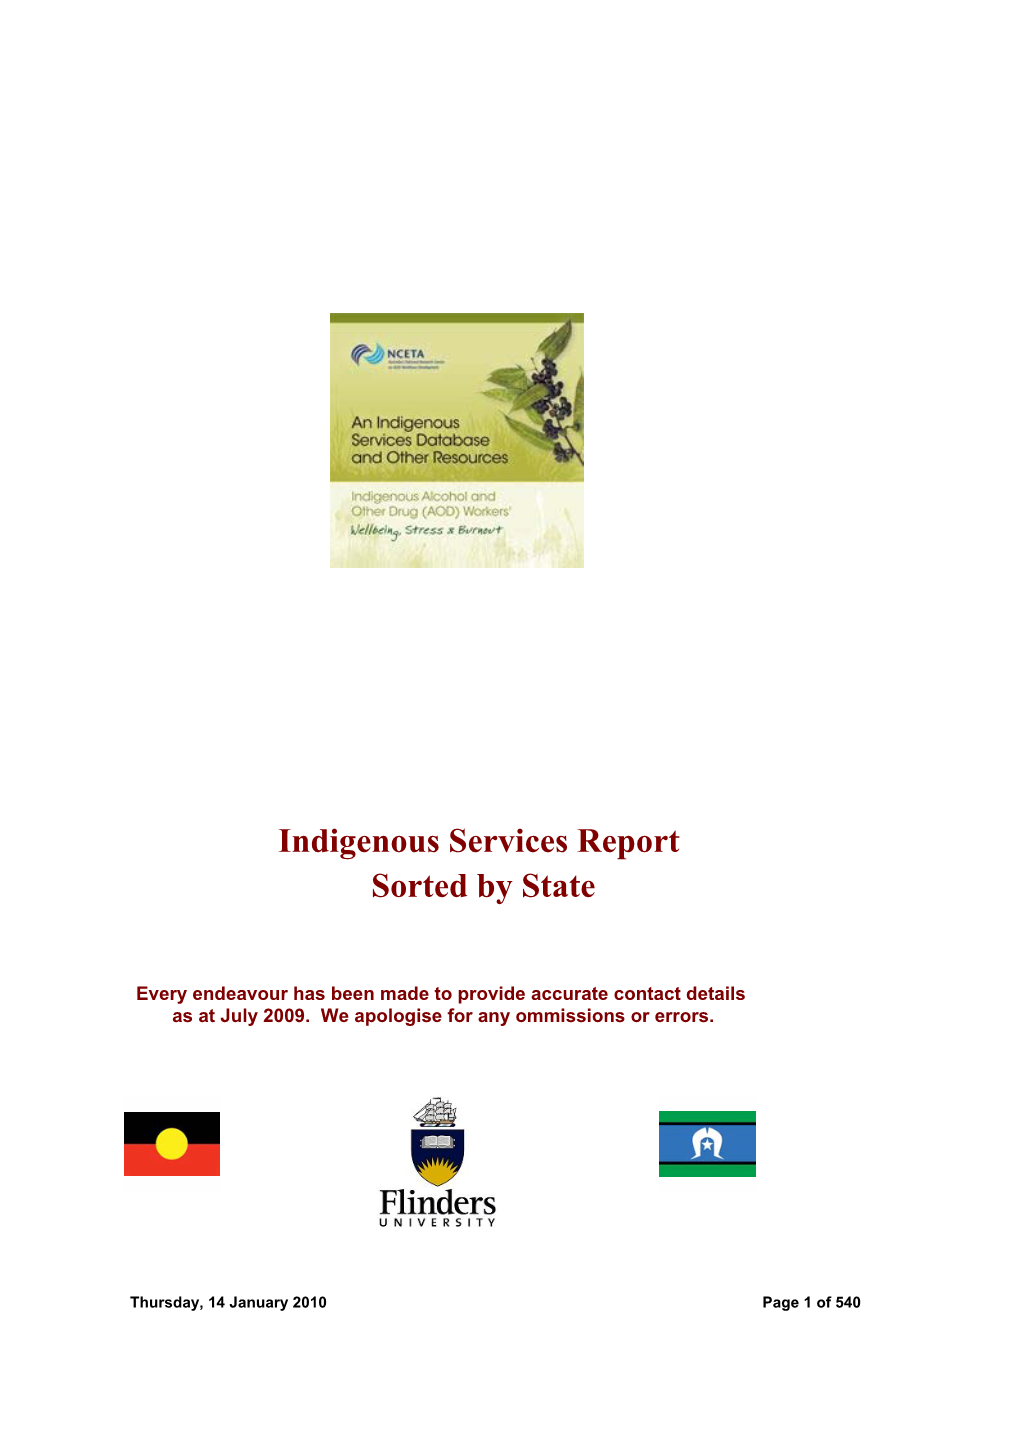 Indigenous Services Report Sorted by State